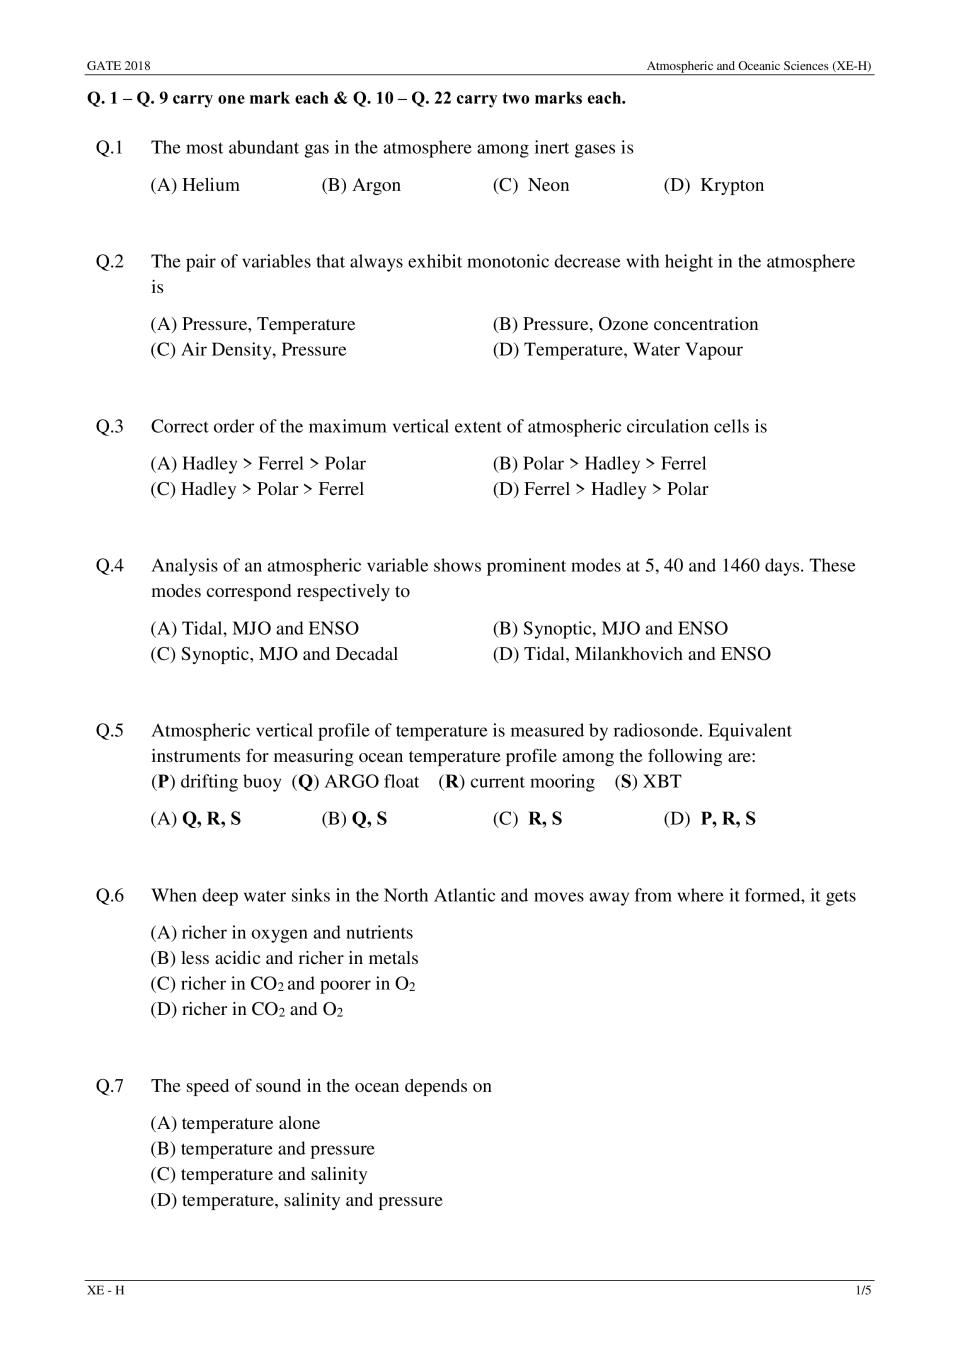 GATE 2018 Atmospheric and Oceanic Sciences (XE-H) Question Paper with Answer - Page 1